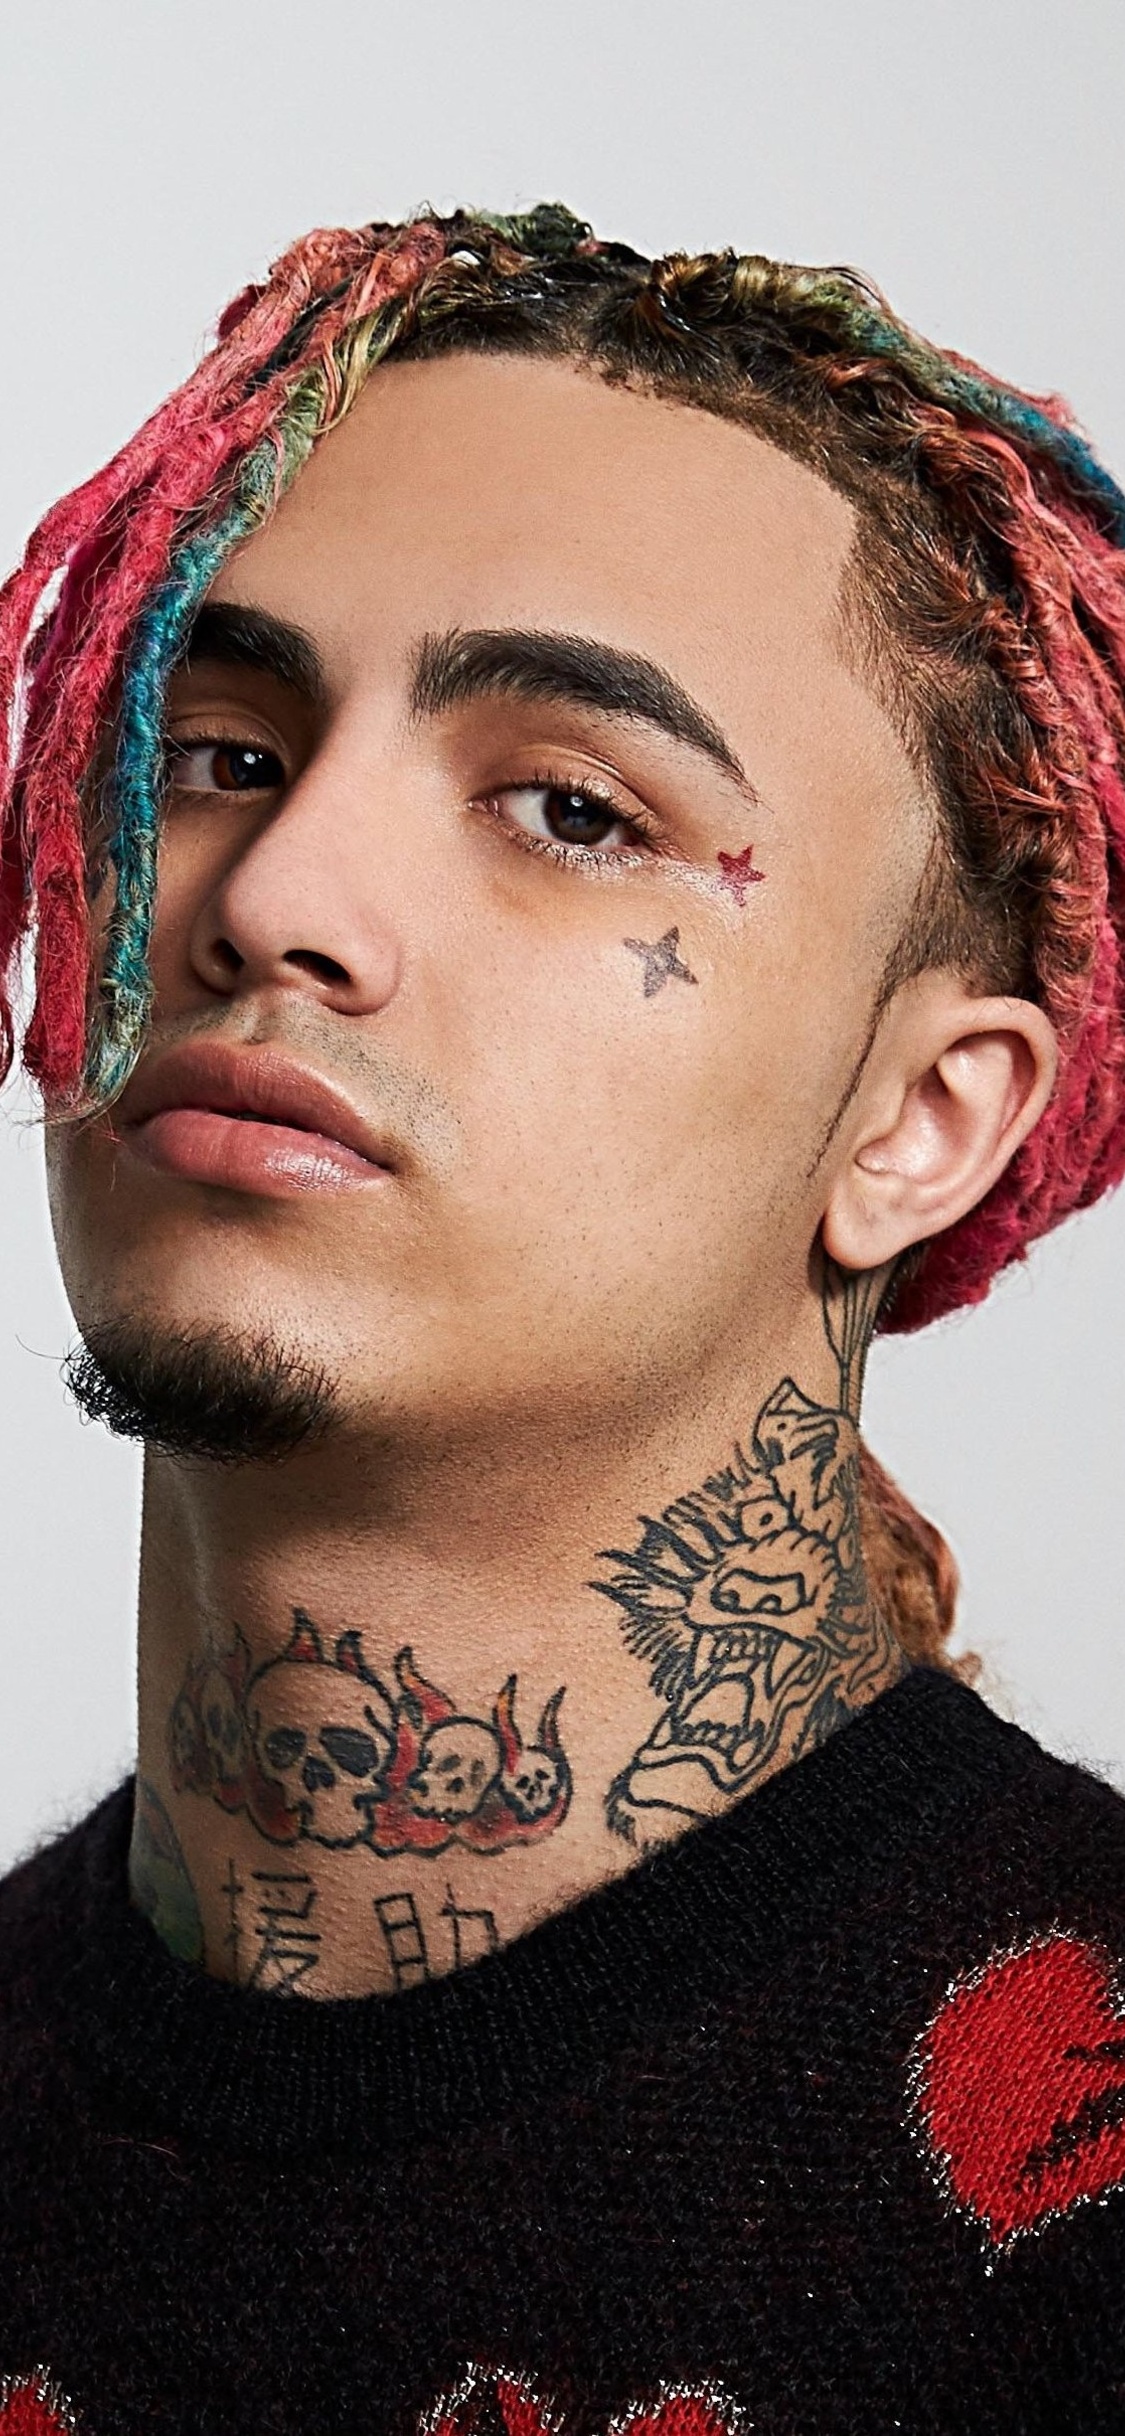 X lil pump iphone xsiphone iphone x hd k wallpapers images backgrounds photos and pictures